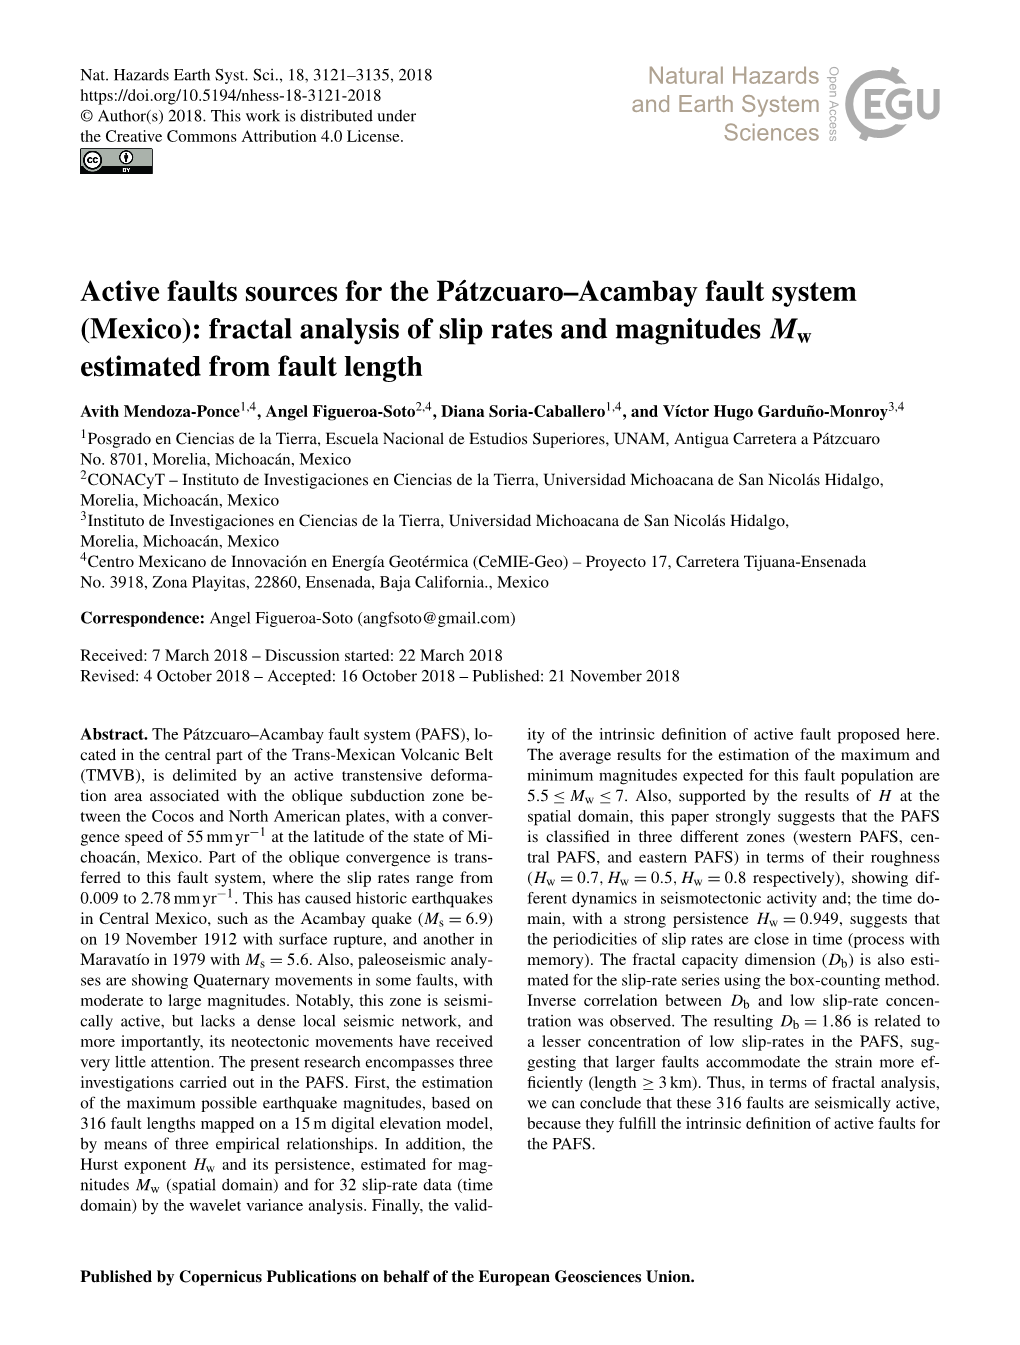 Active Faults Sources for the Pátzcuaro–Acambay Fault System (Mexico): Fractal Analysis of Slip Rates and Magnitudes Mw Estimated from Fault Length